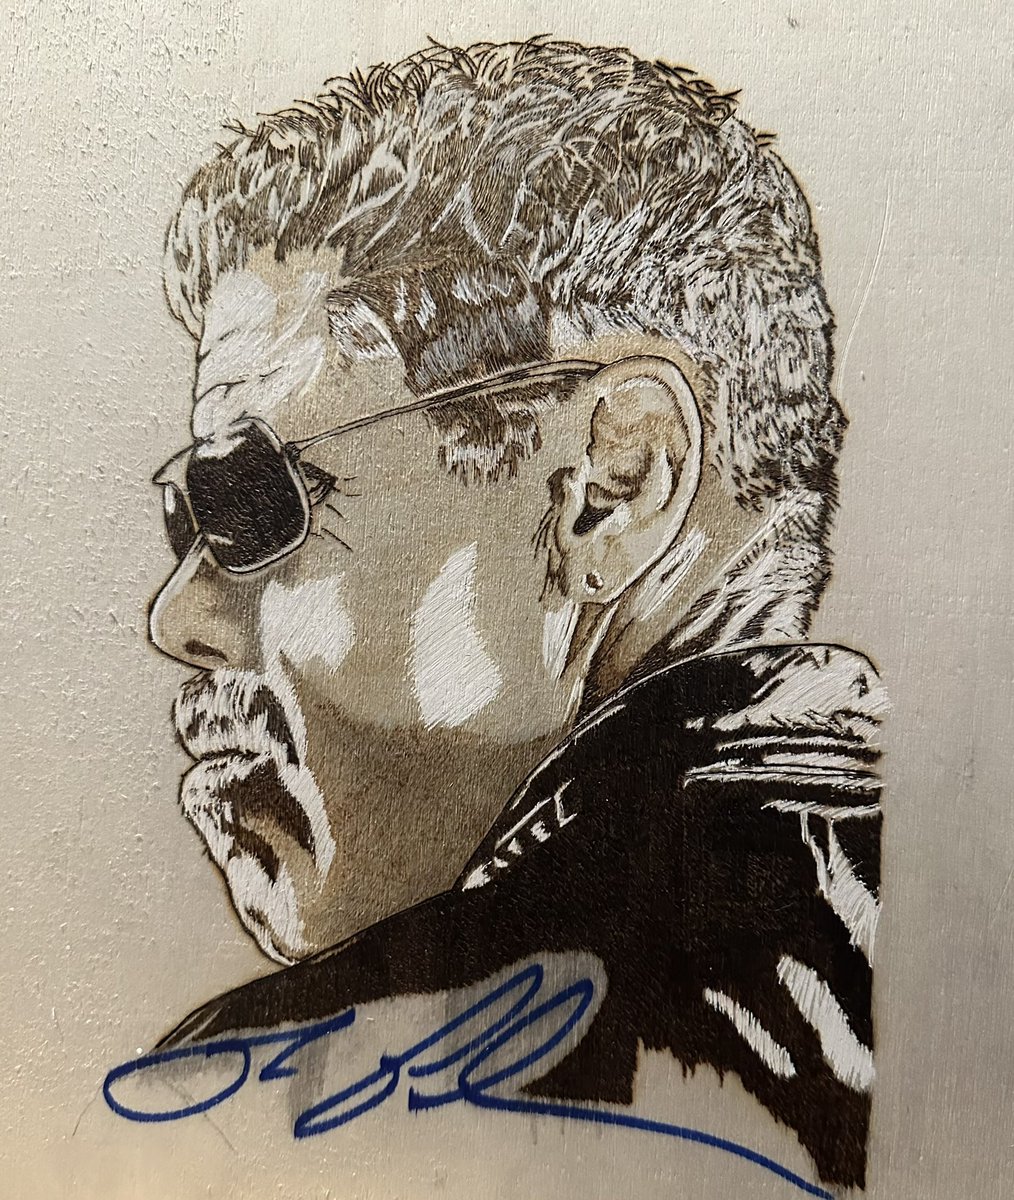 Wood burning of Ron Perlman/ Clay Morrow from Sons of Anarchy. #ronperlman